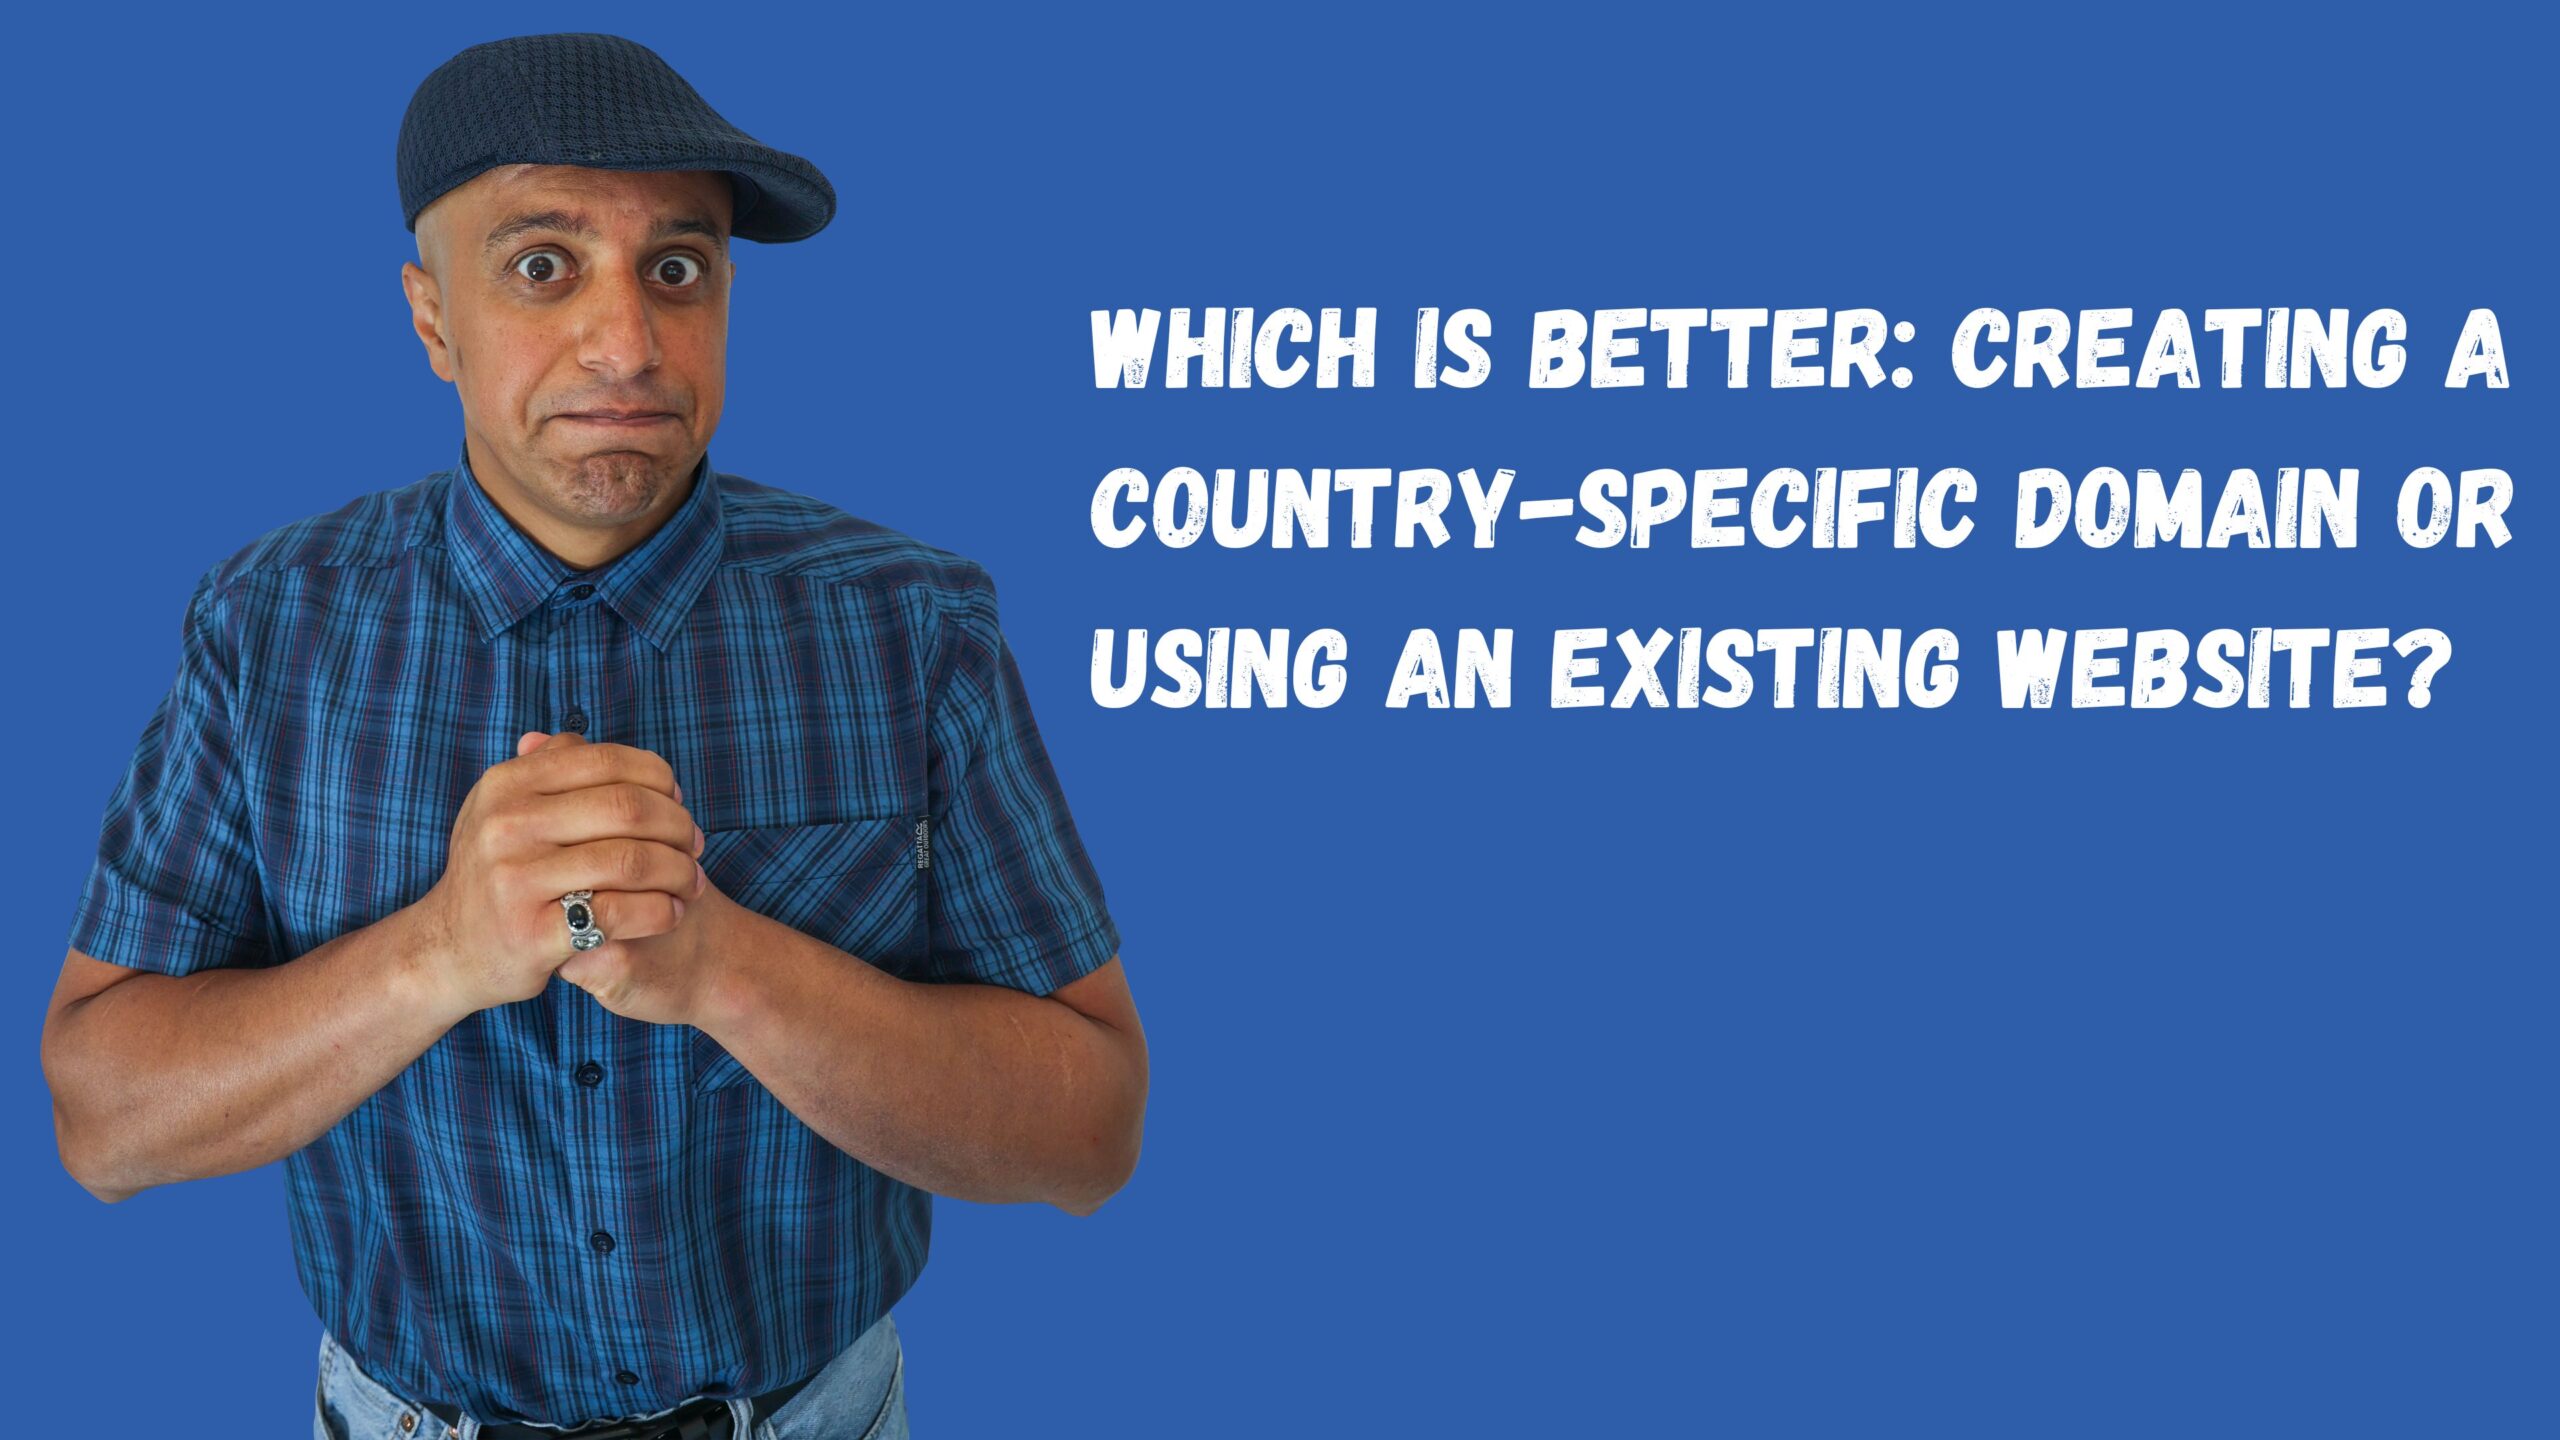 Which is Better: Creating a Country-Specific Domain or Using an Existing Website?